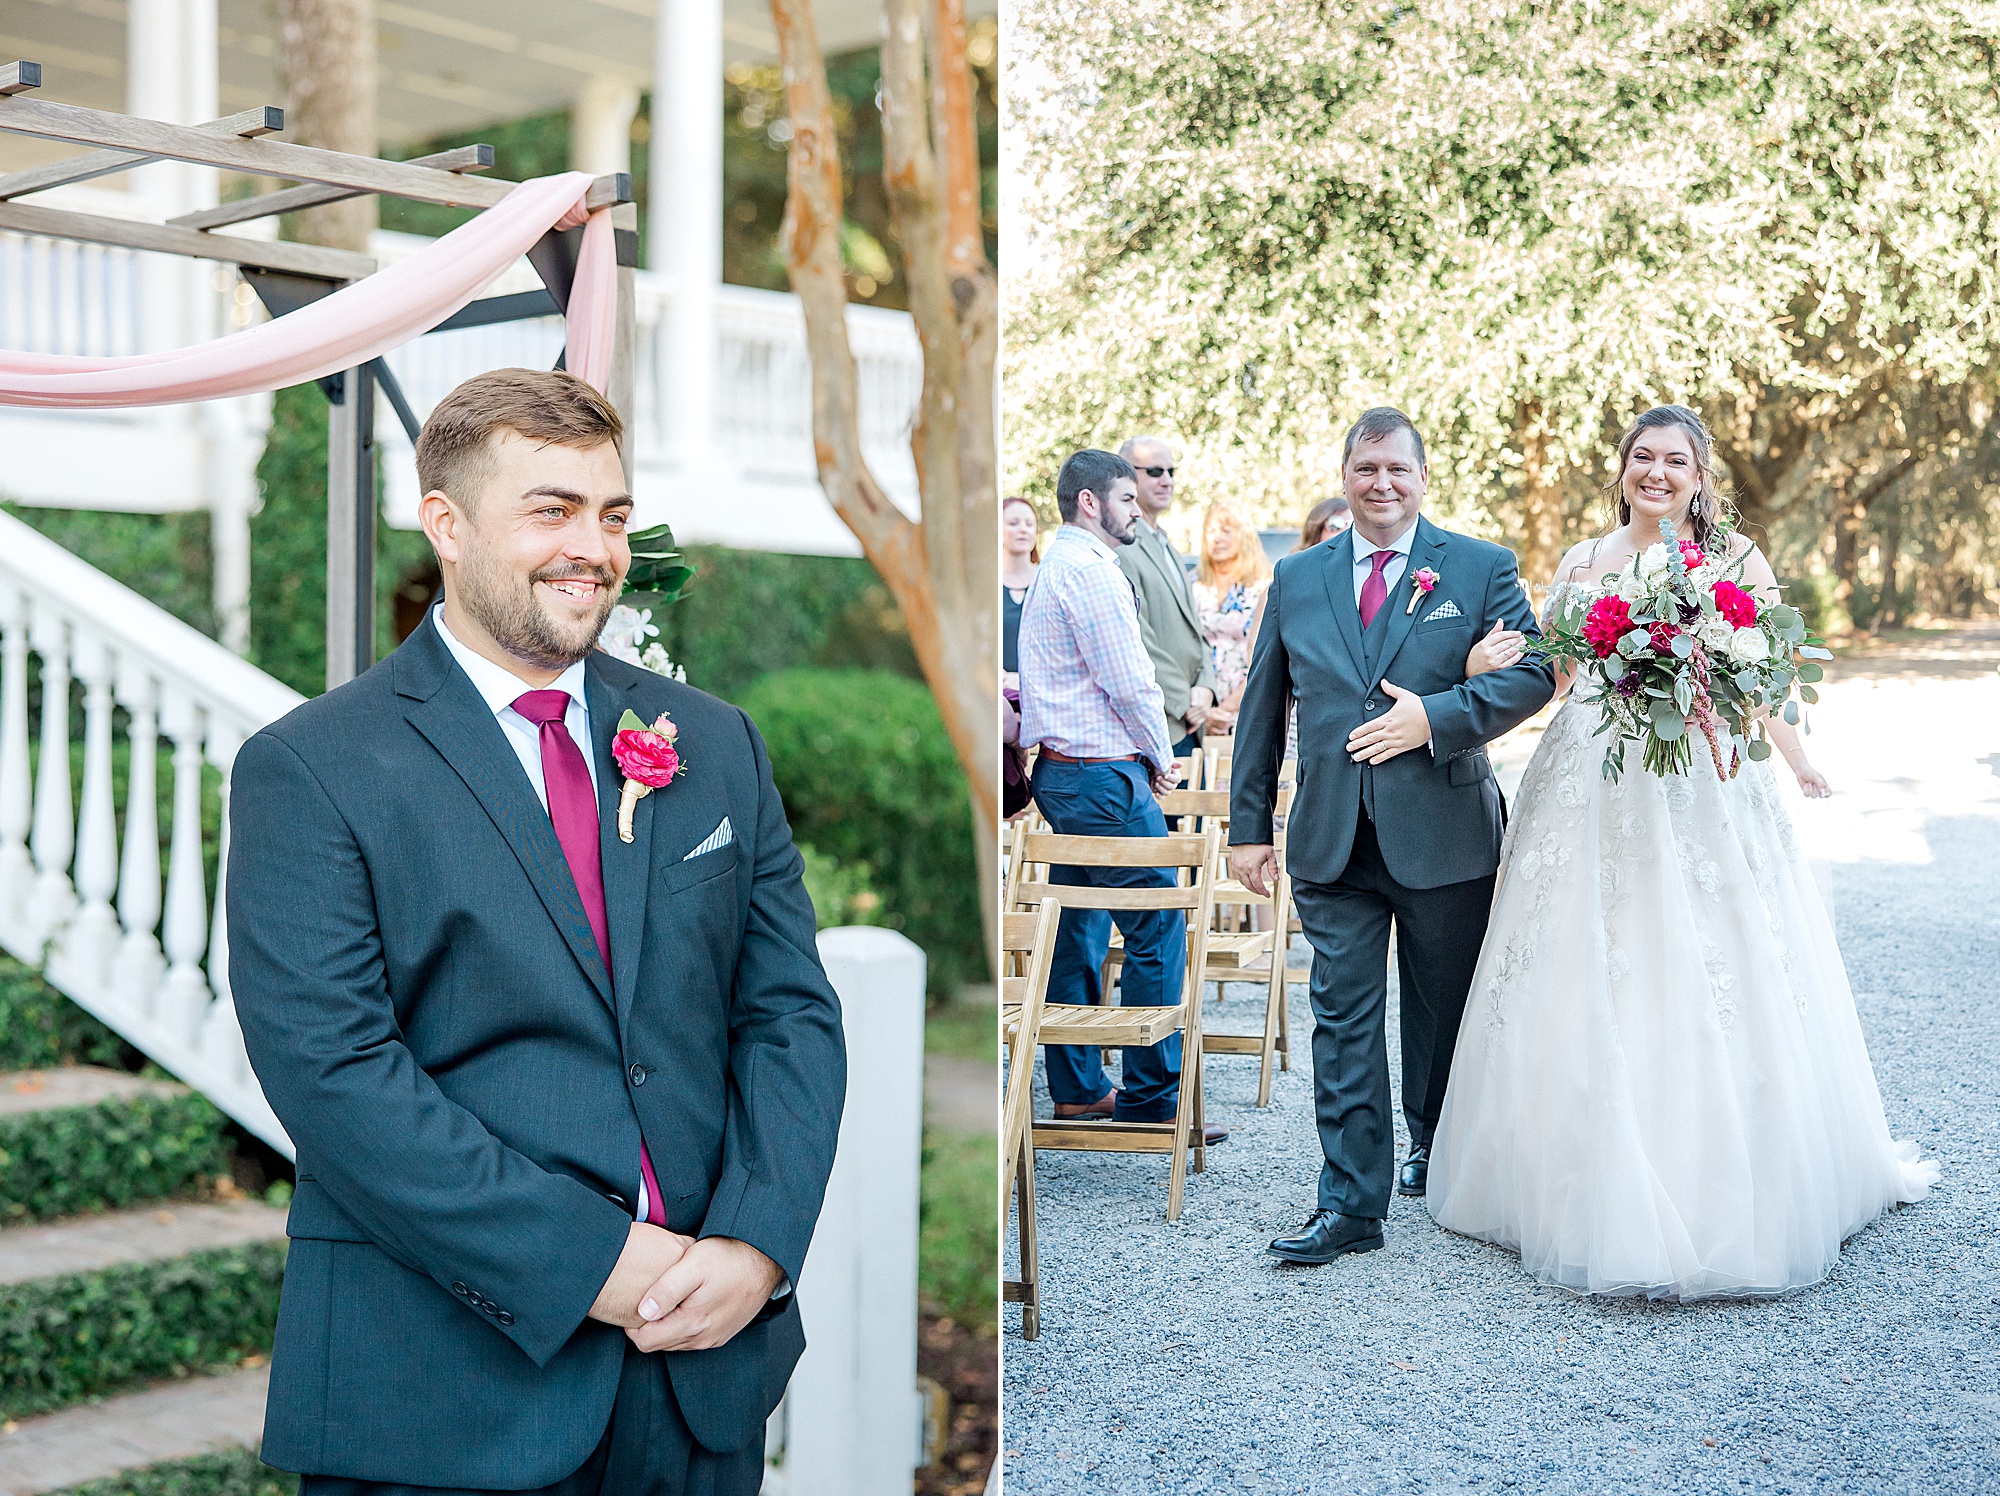 Charleston Wedding photographer captures bride and father walking down the aisle